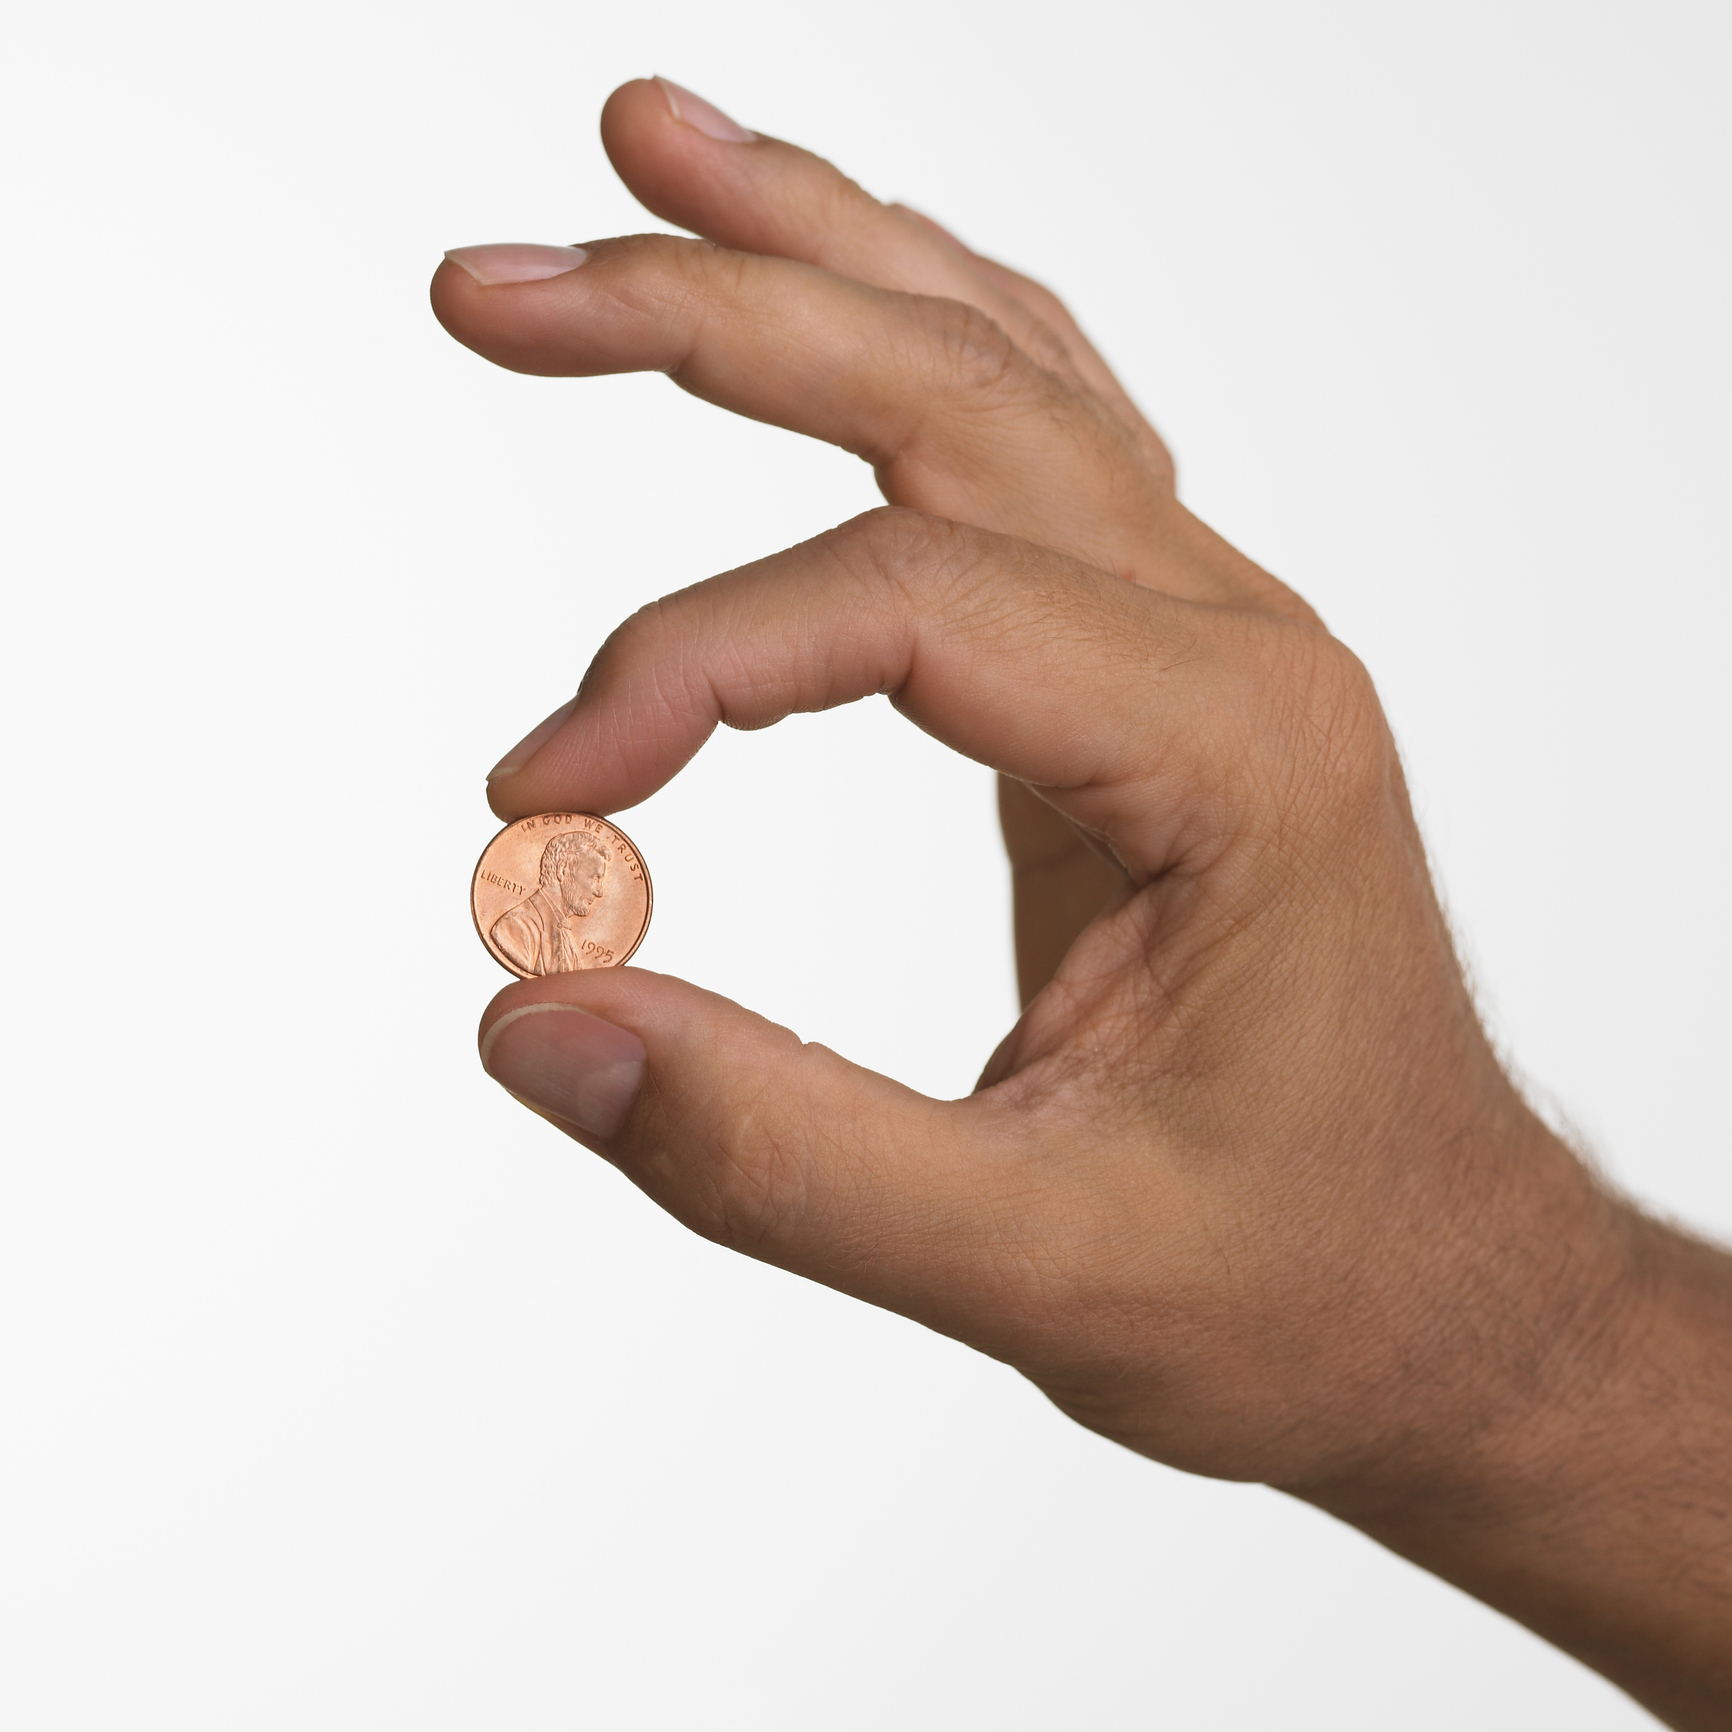 A hand holding a penny